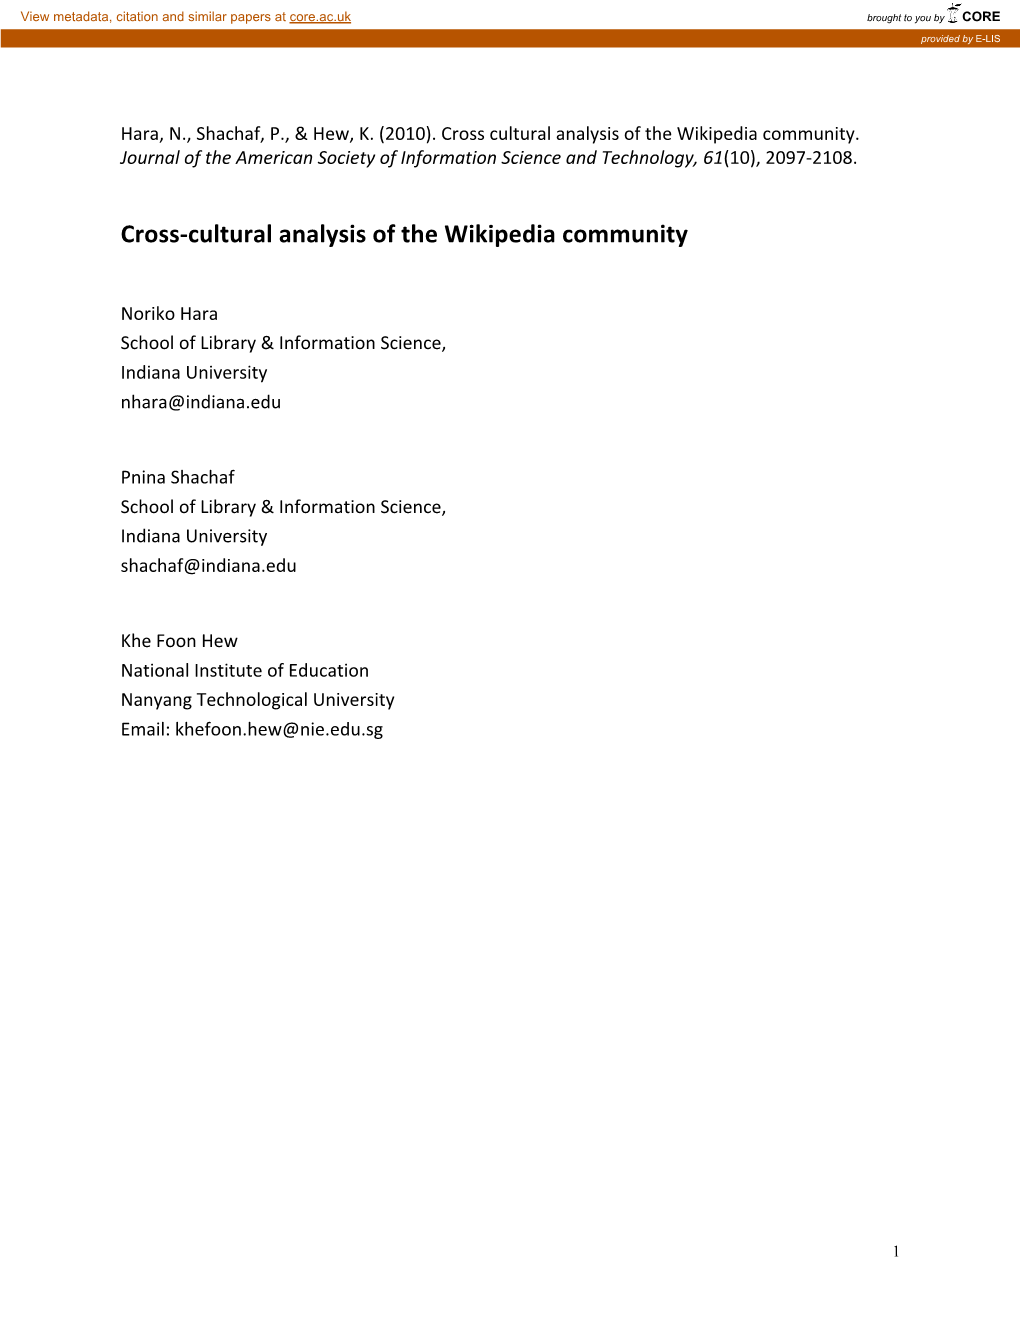 Cross‐Cultural Analysis of the Wikipedia Community